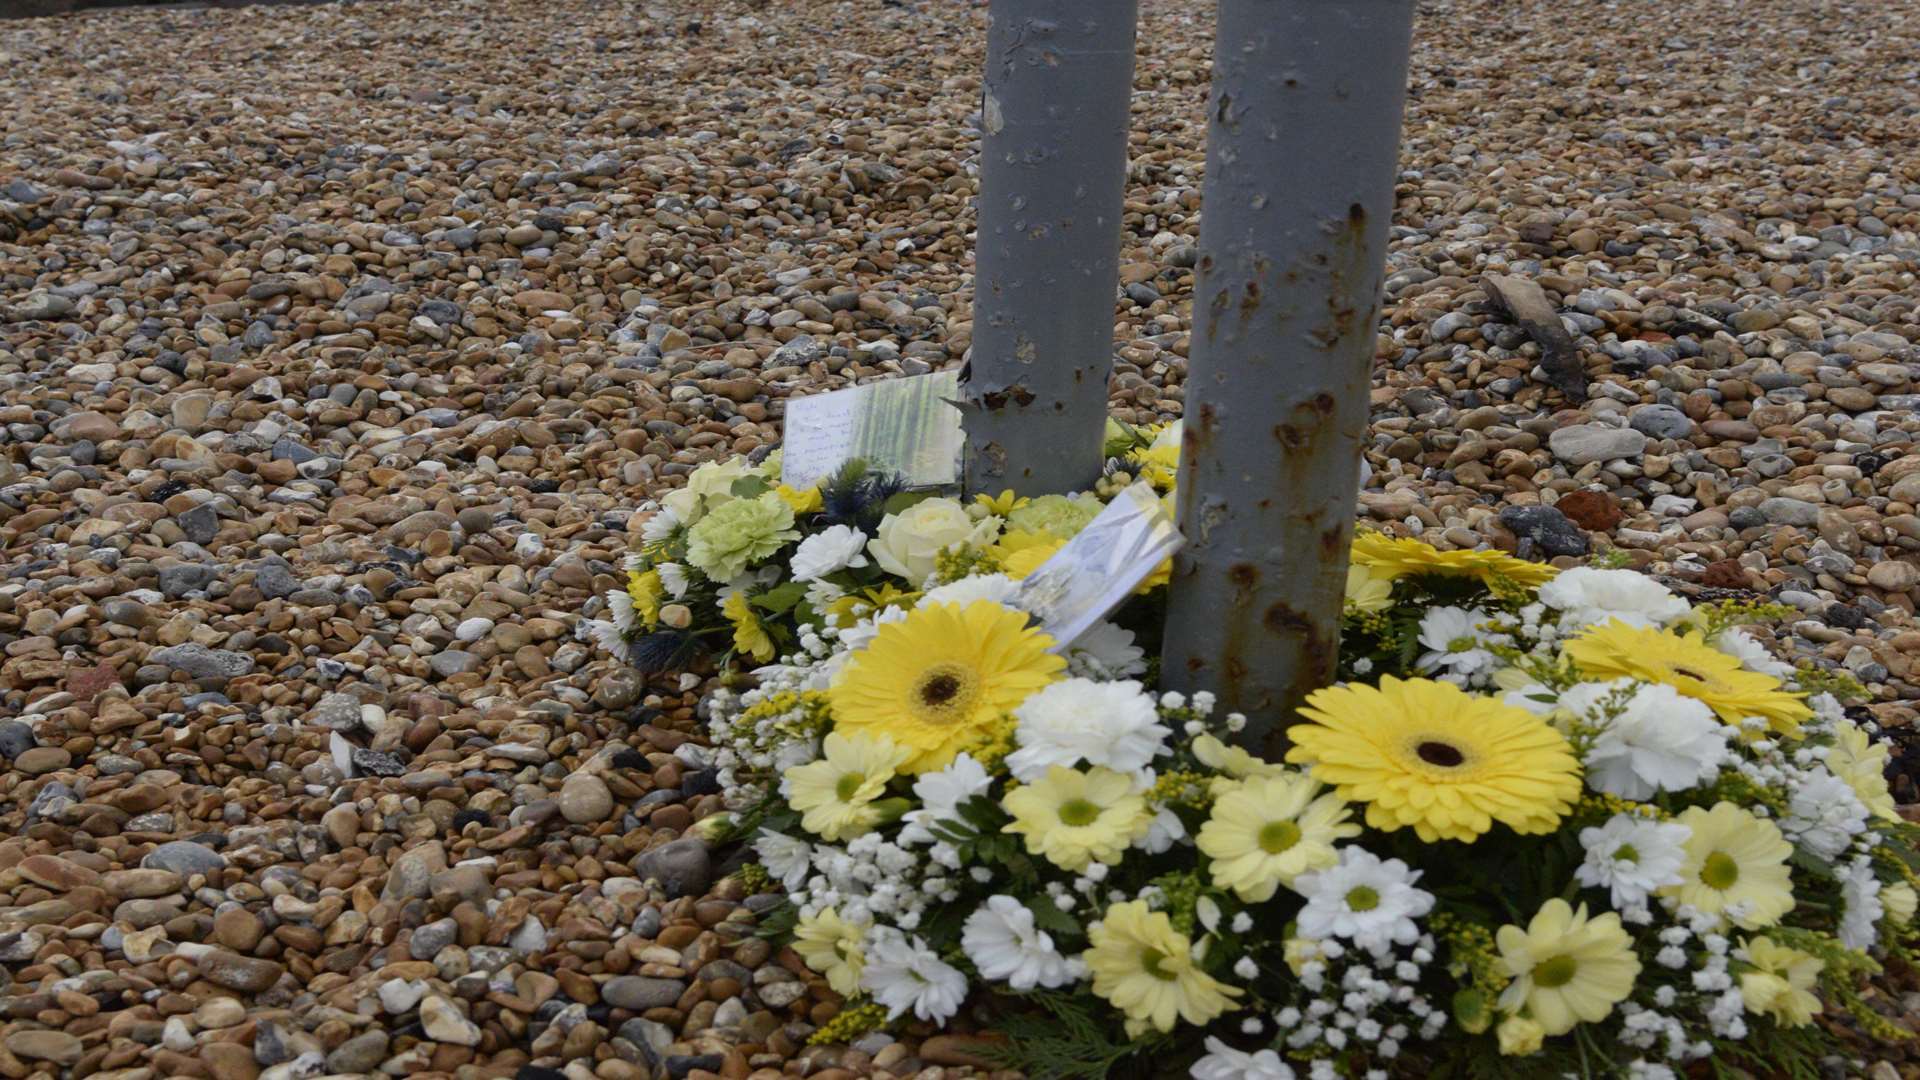 A tribute at the scene of the tragedy. Picture: Chris Davey